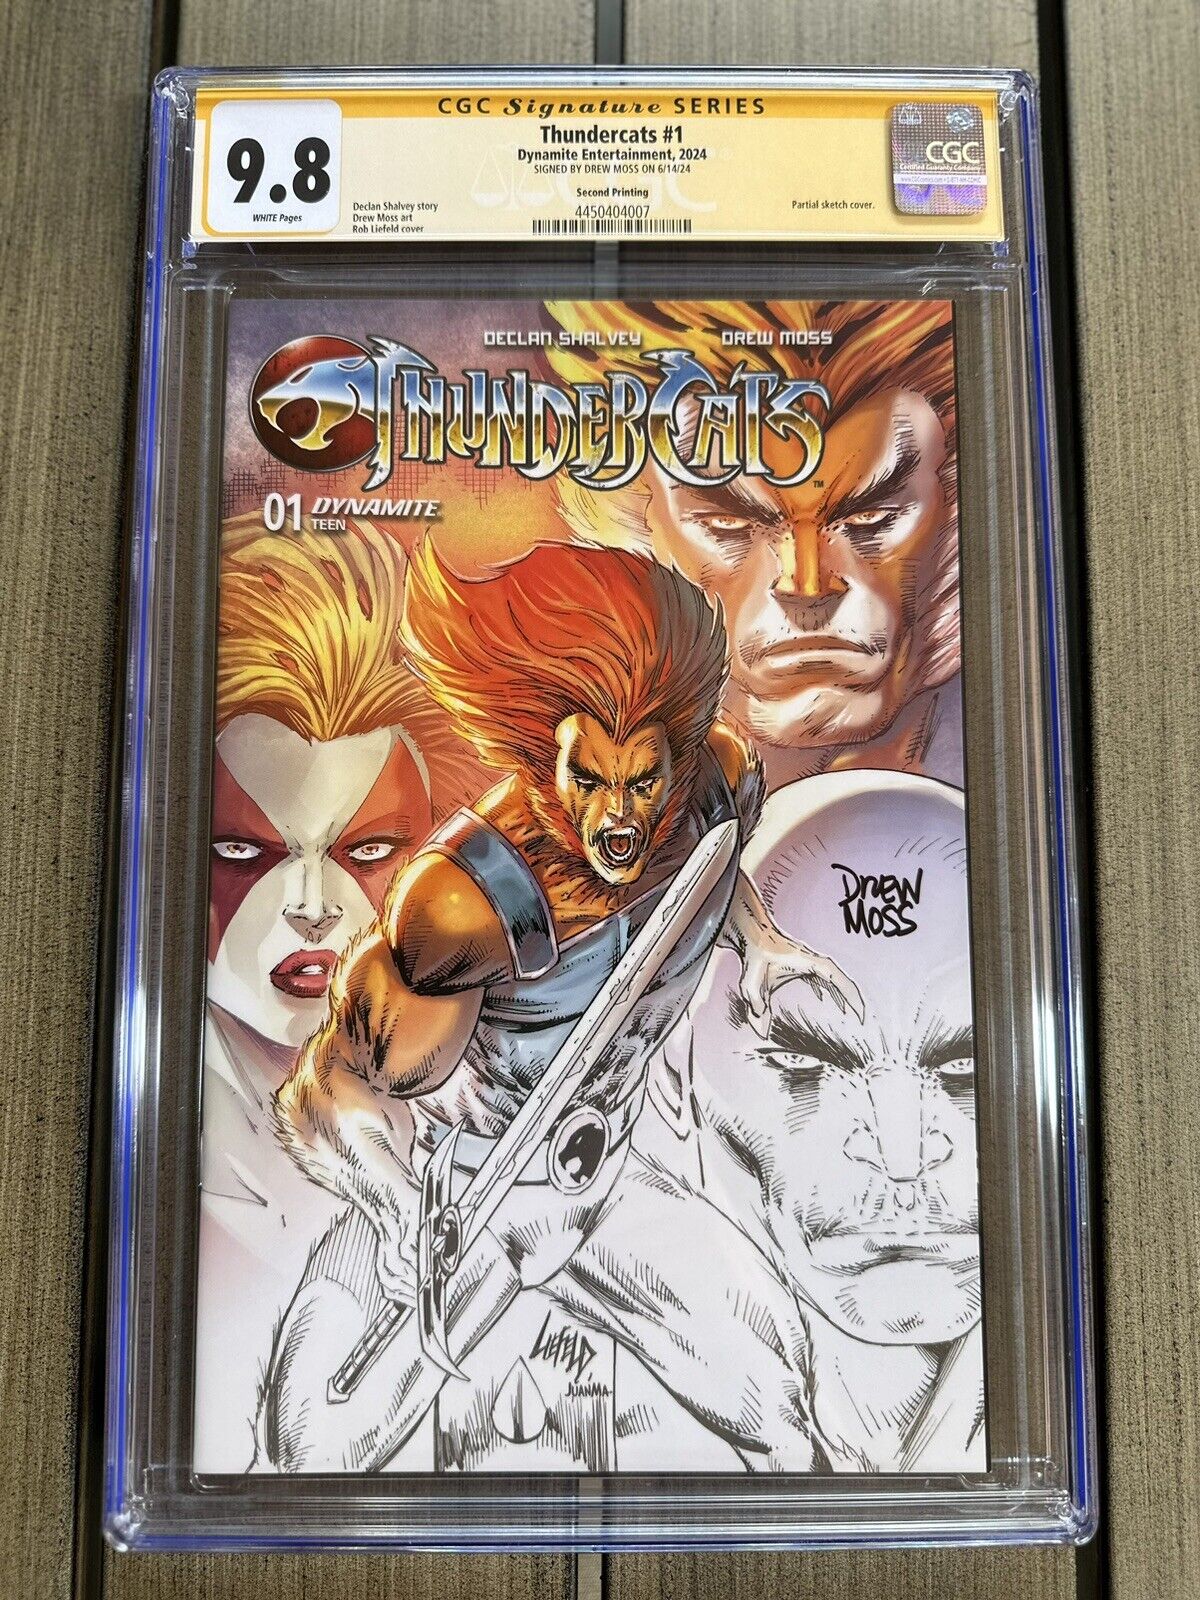 Thundercats #1 CGC 9.8 🔥Drew Moss Signature🔥Rob Liefeld Partial Sketch Cover